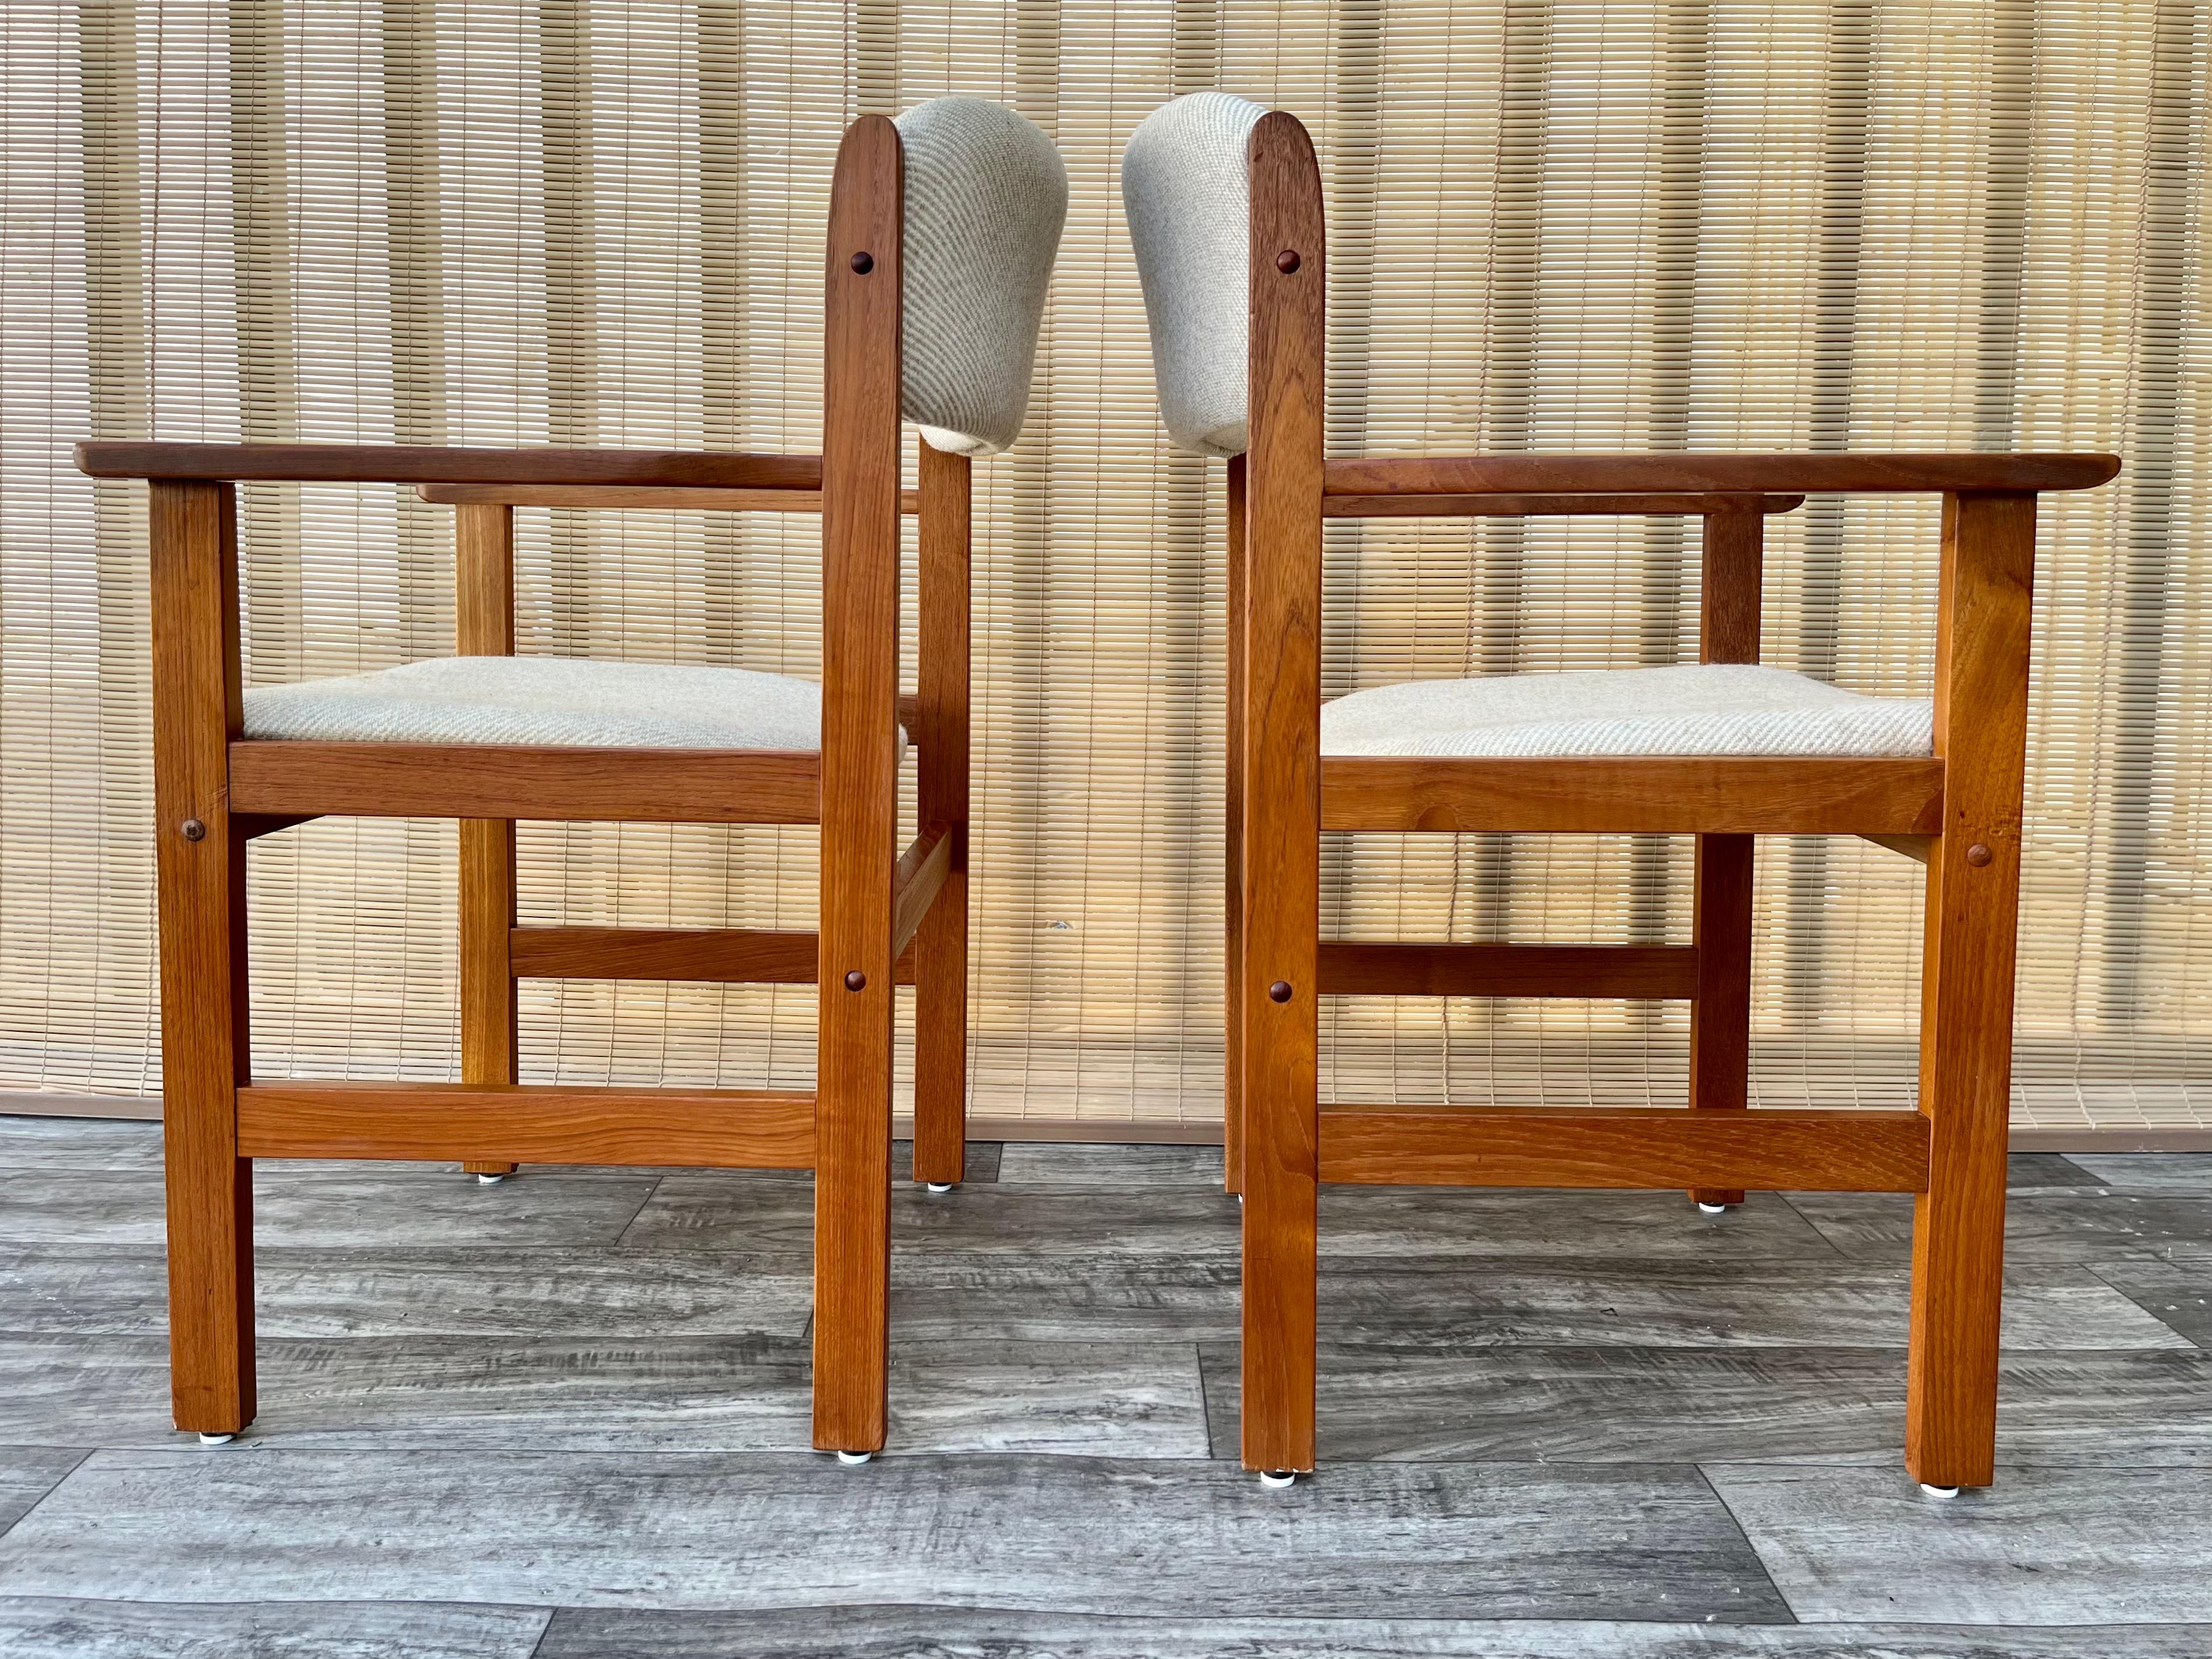 Upholstery 1980s Mid-Century Danish Modern Style Captain Chairs by Benny Linden Design. For Sale